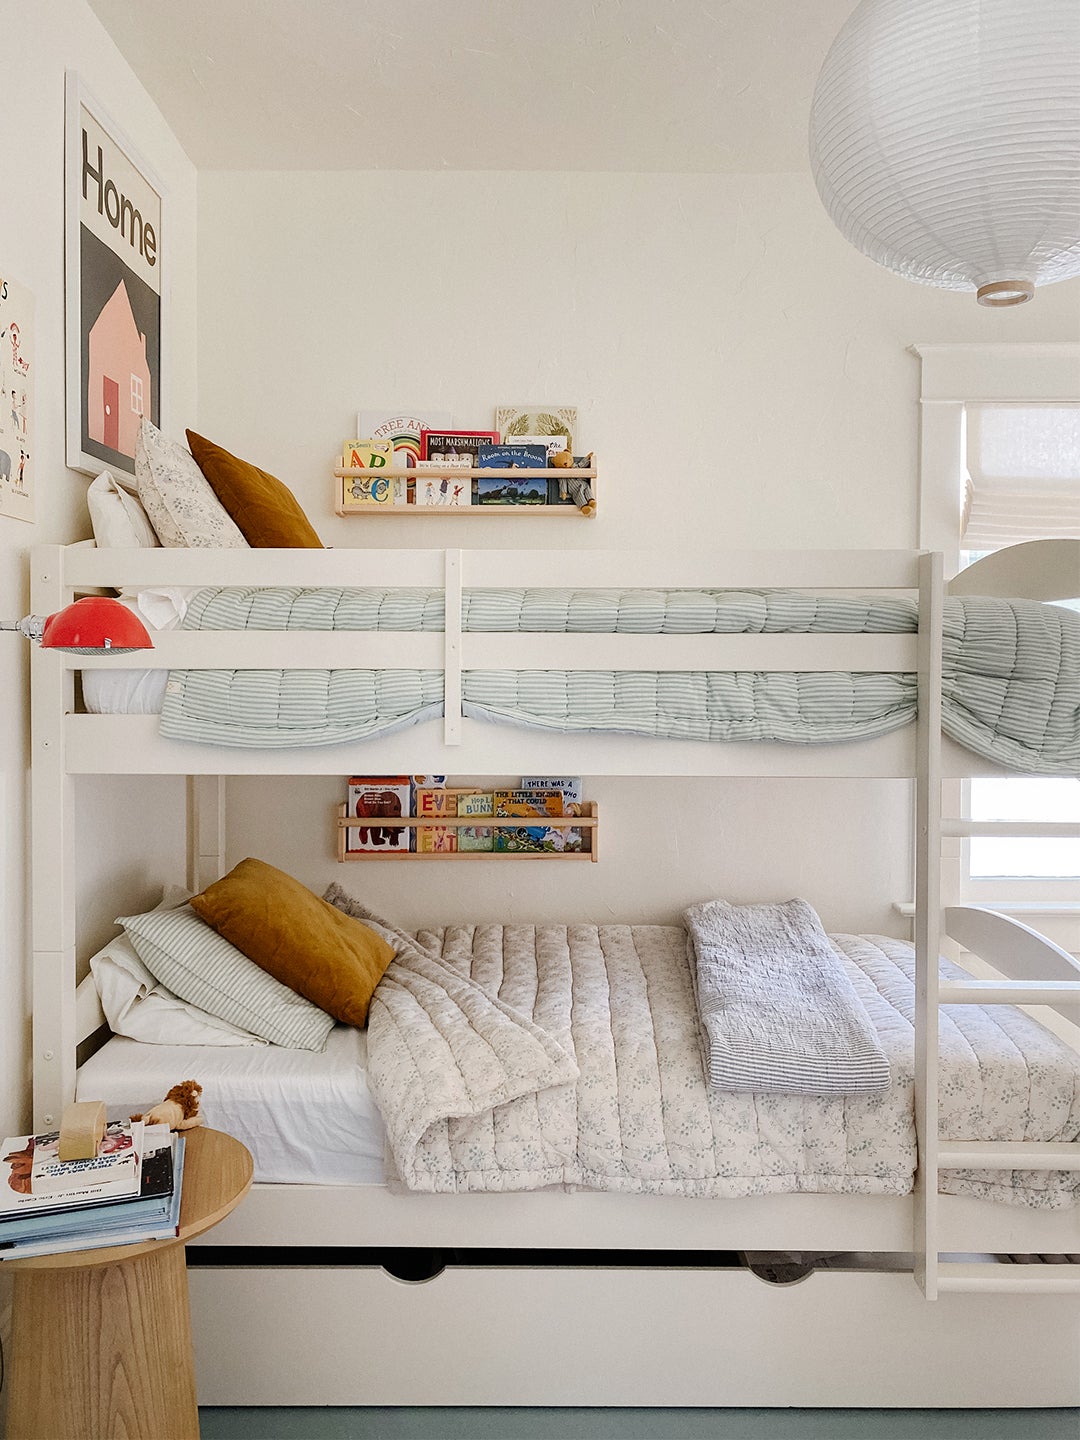 white bunk bedbeds with blue quilts